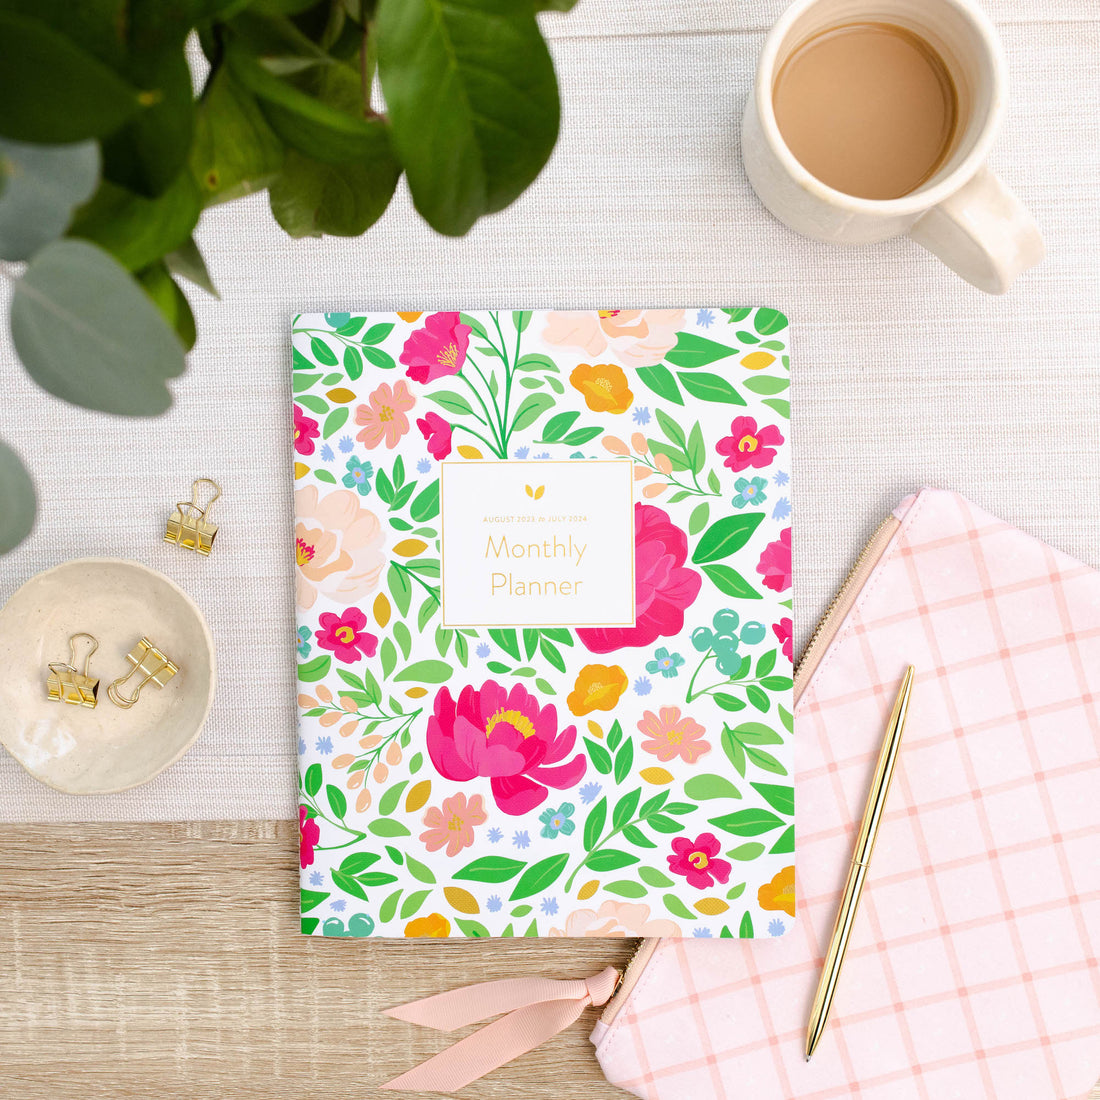 5 Reasons to Love Cultivate What Matters' Monthly Planner